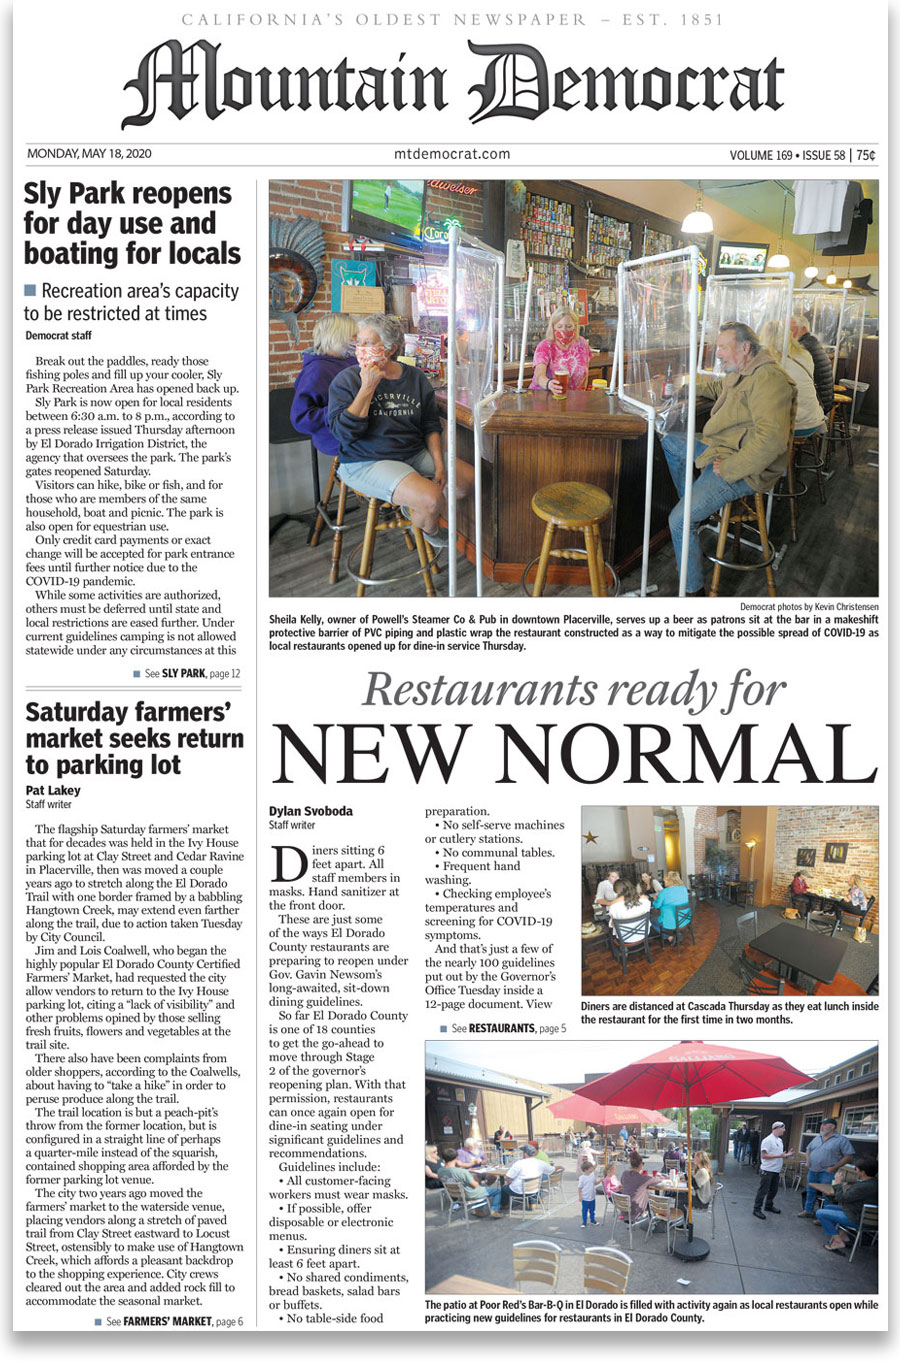 An image of the Mountain Democrat’s front page from May 18, 2020. The main headline reads “Restaurants ready for new normal.”